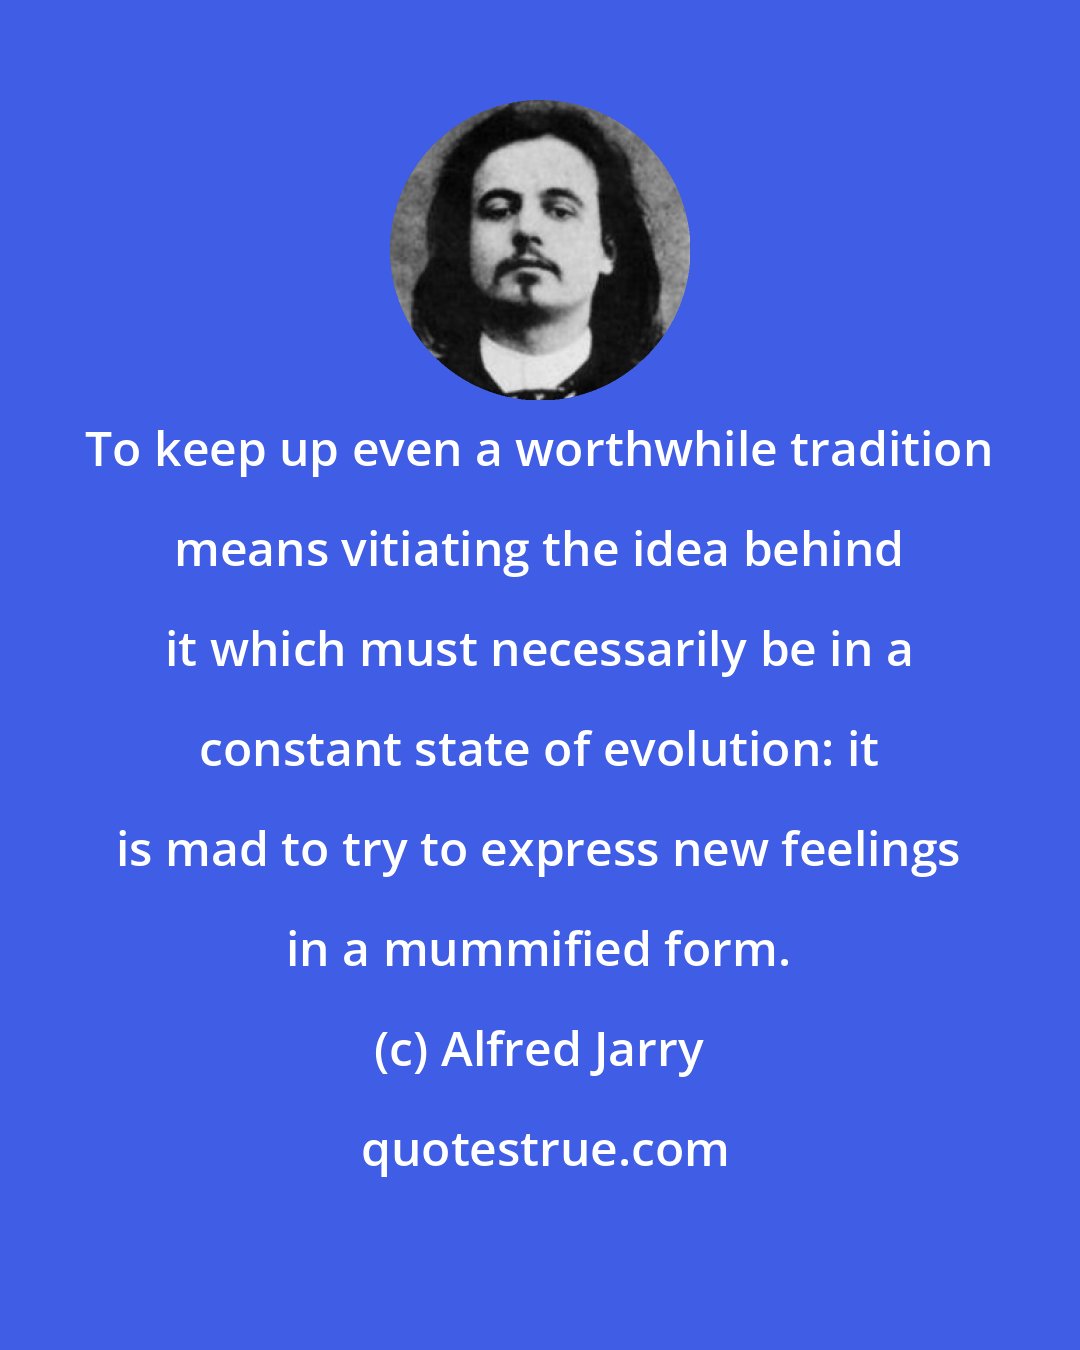 Alfred Jarry: To keep up even a worthwhile tradition means vitiating the idea behind it which must necessarily be in a constant state of evolution: it is mad to try to express new feelings in a mummified form.